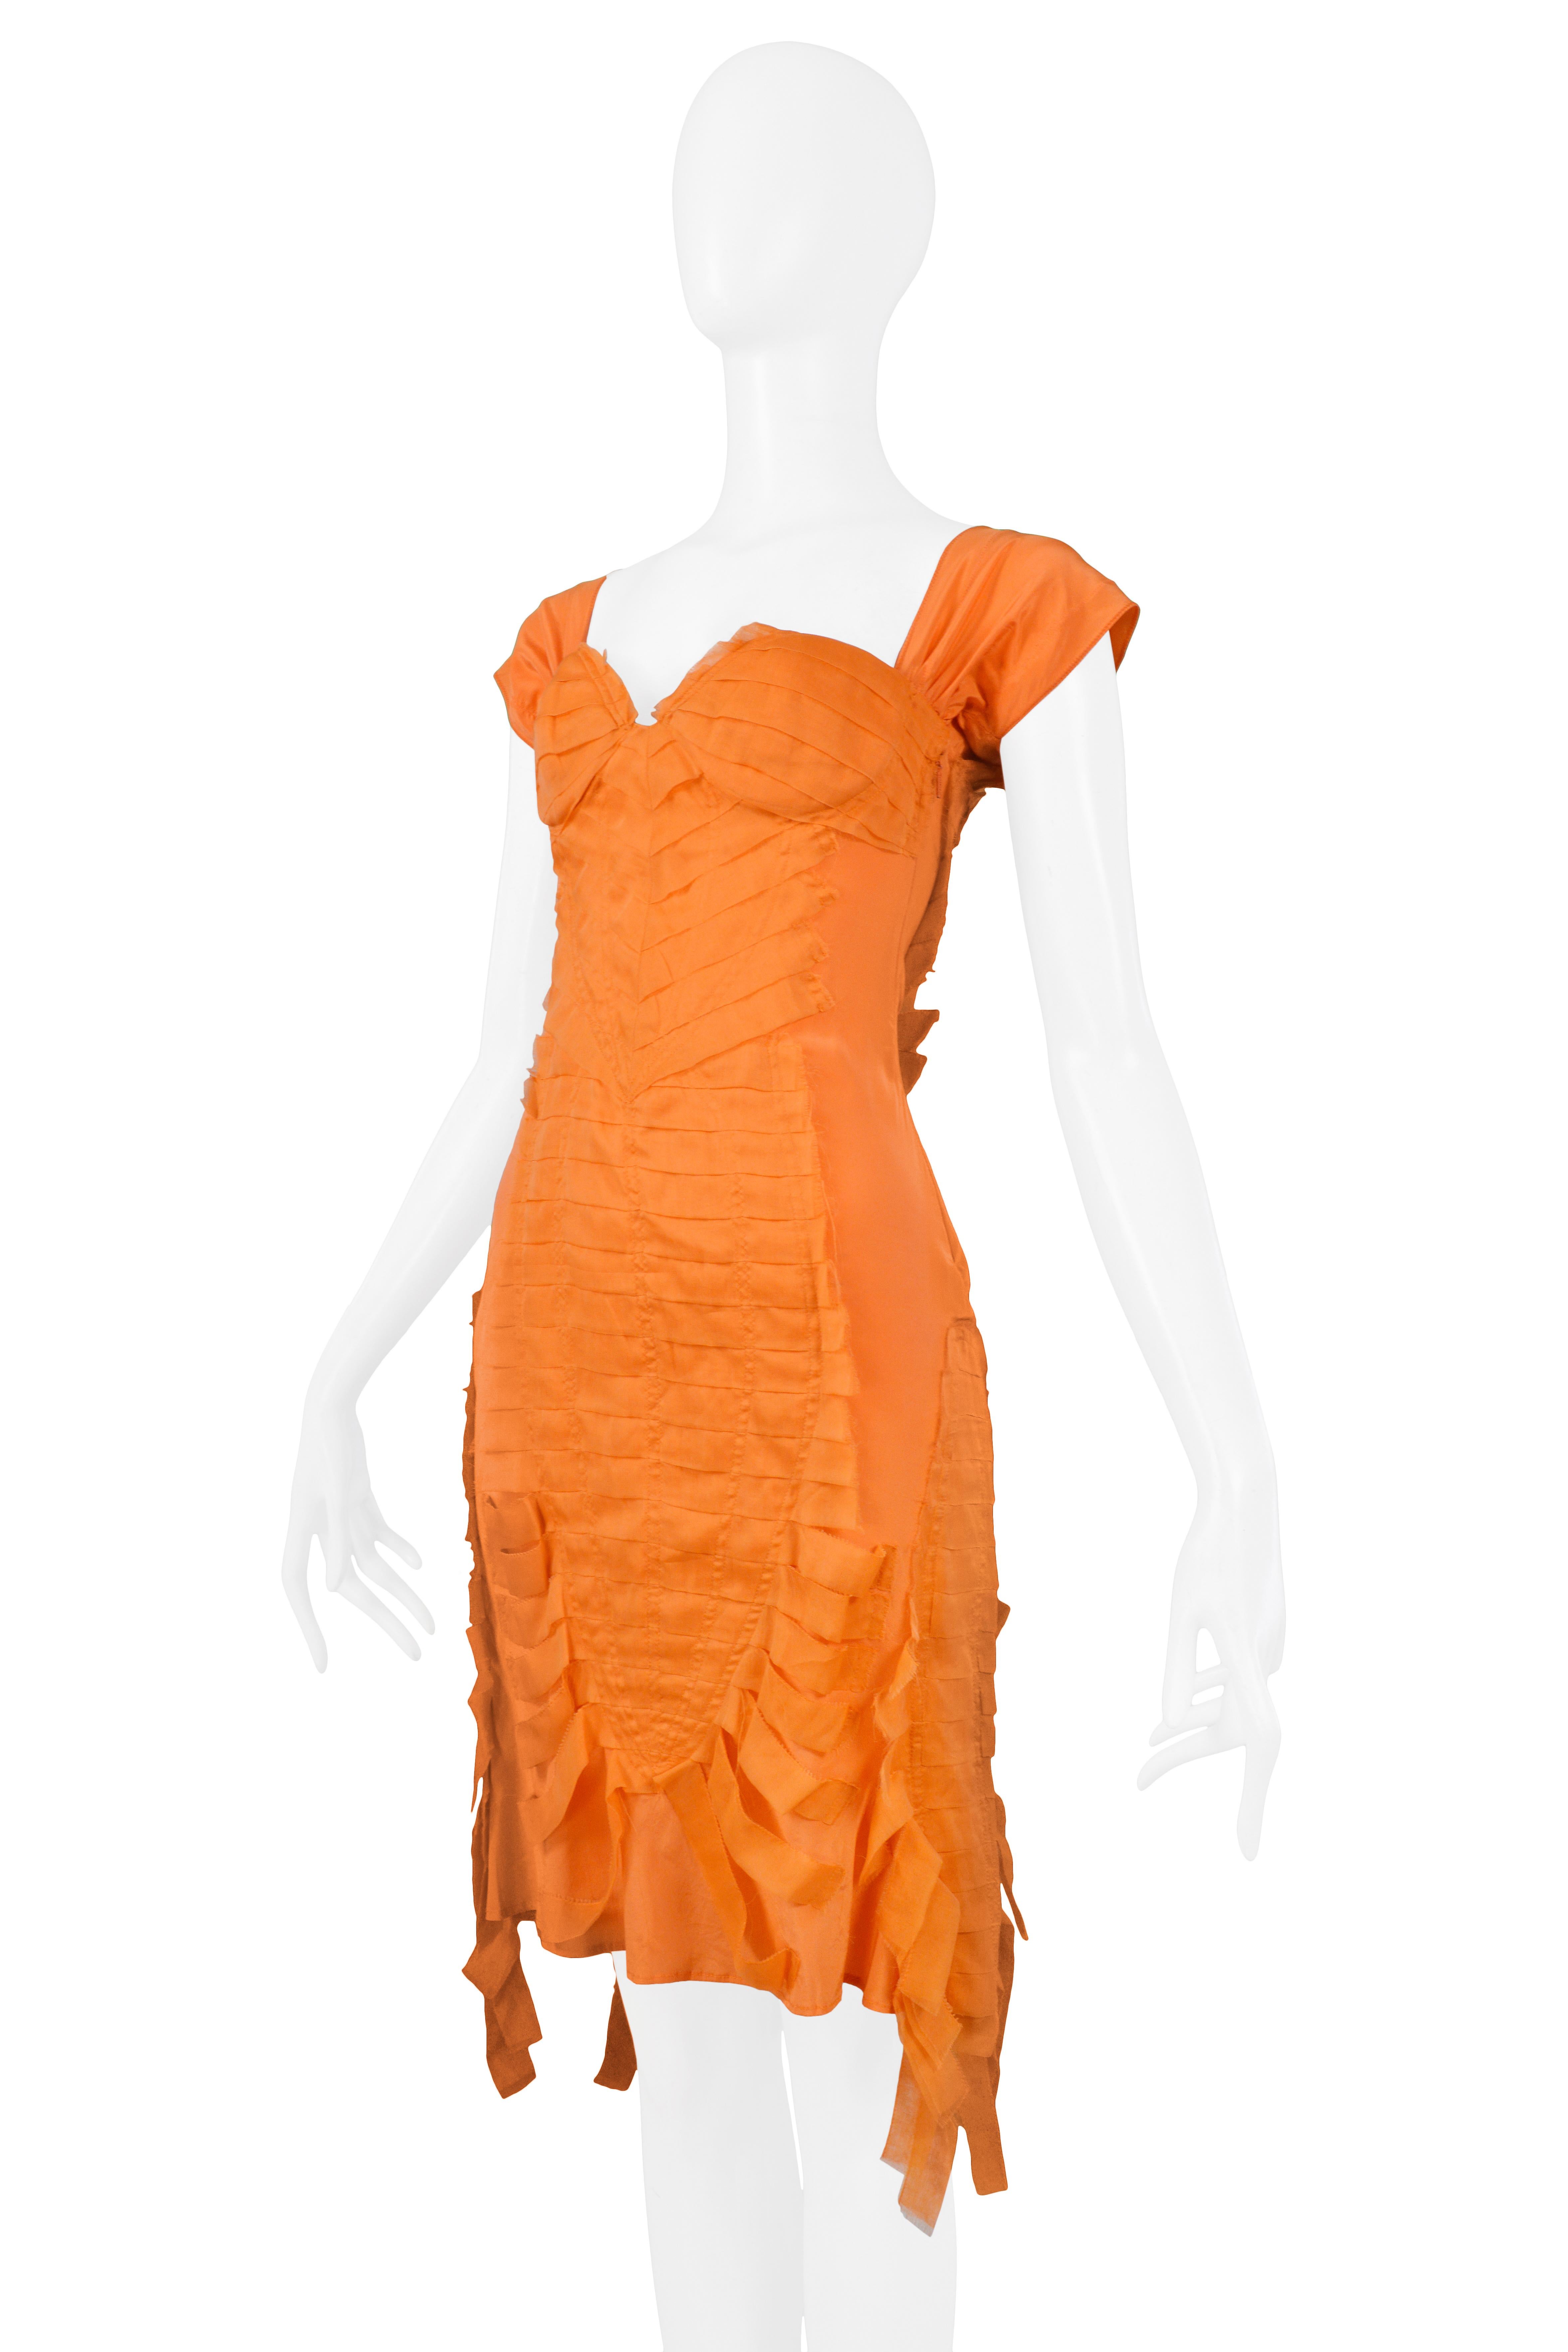 Vintage Gucci by Tom Ford Orange Silk Cocktail Dress  Runway 2004 In Excellent Condition For Sale In Los Angeles, CA